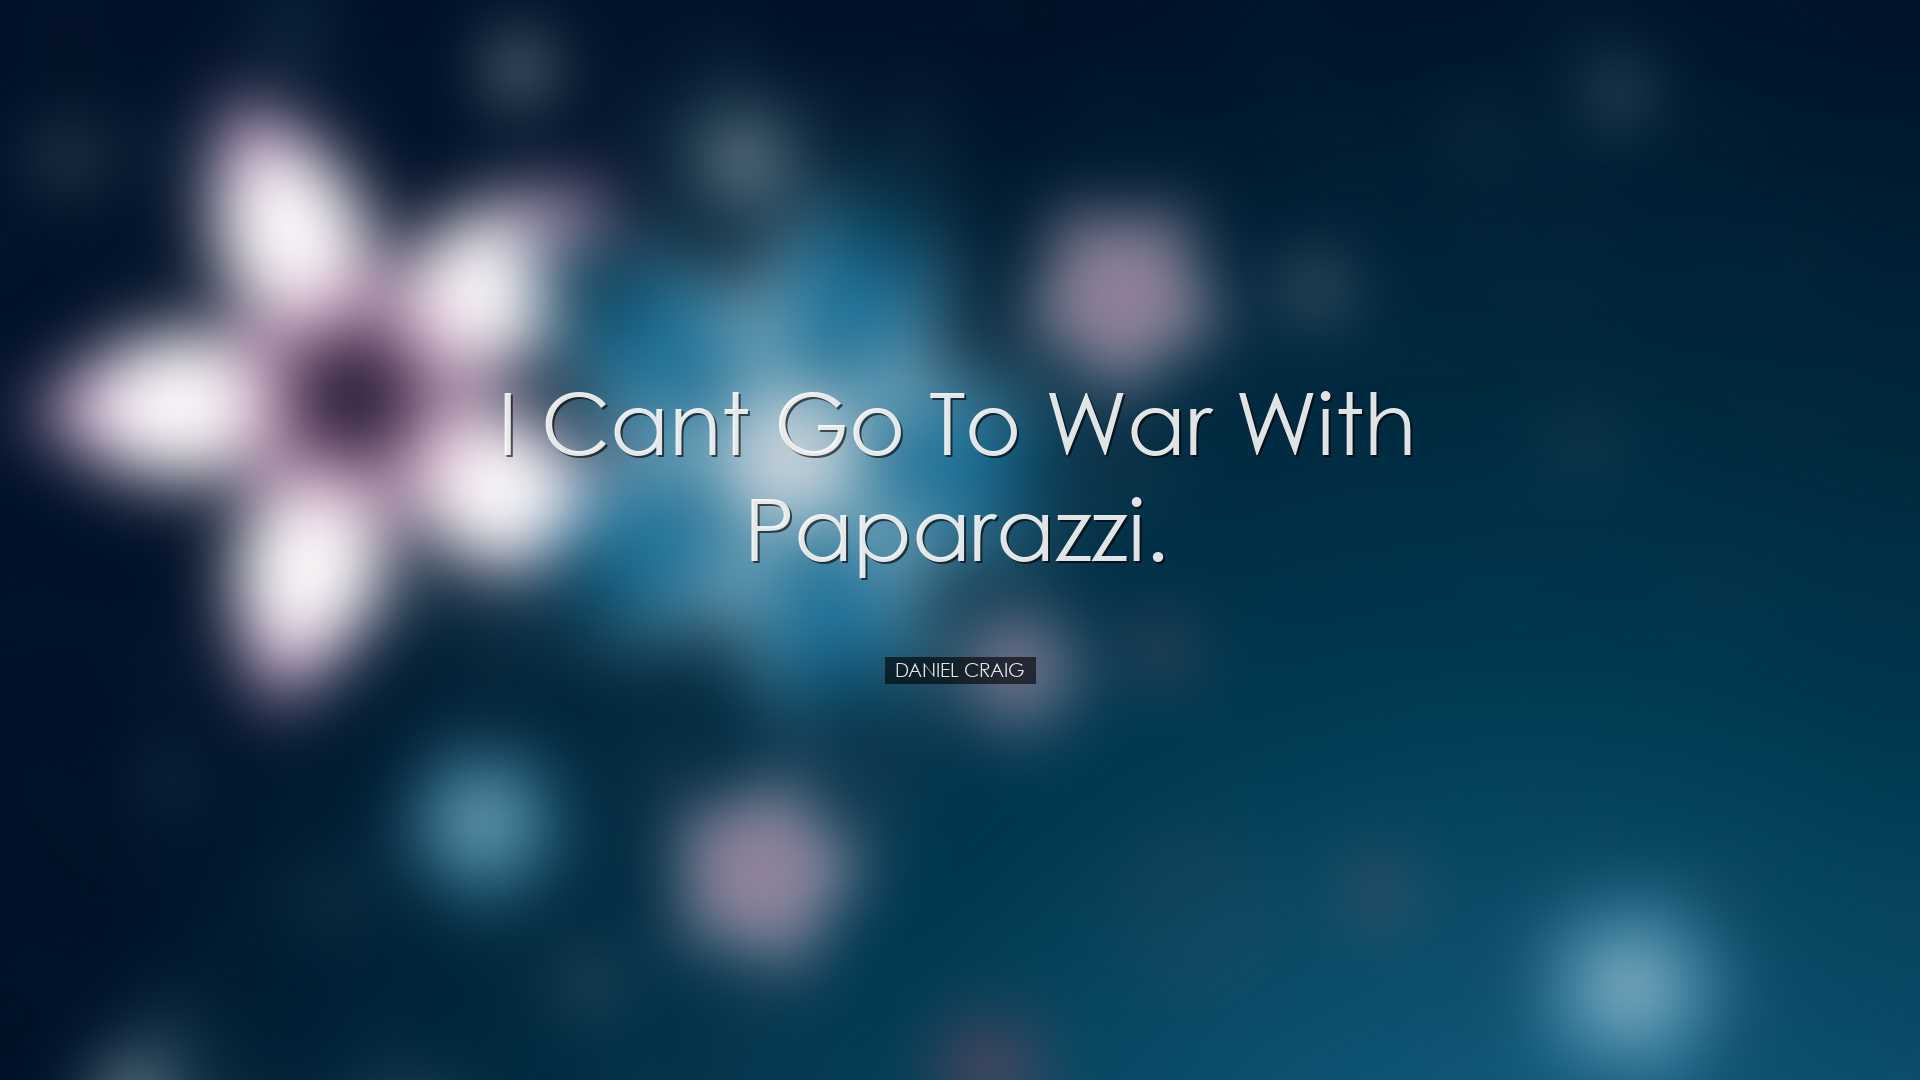 I cant go to war with paparazzi. - Daniel Craig